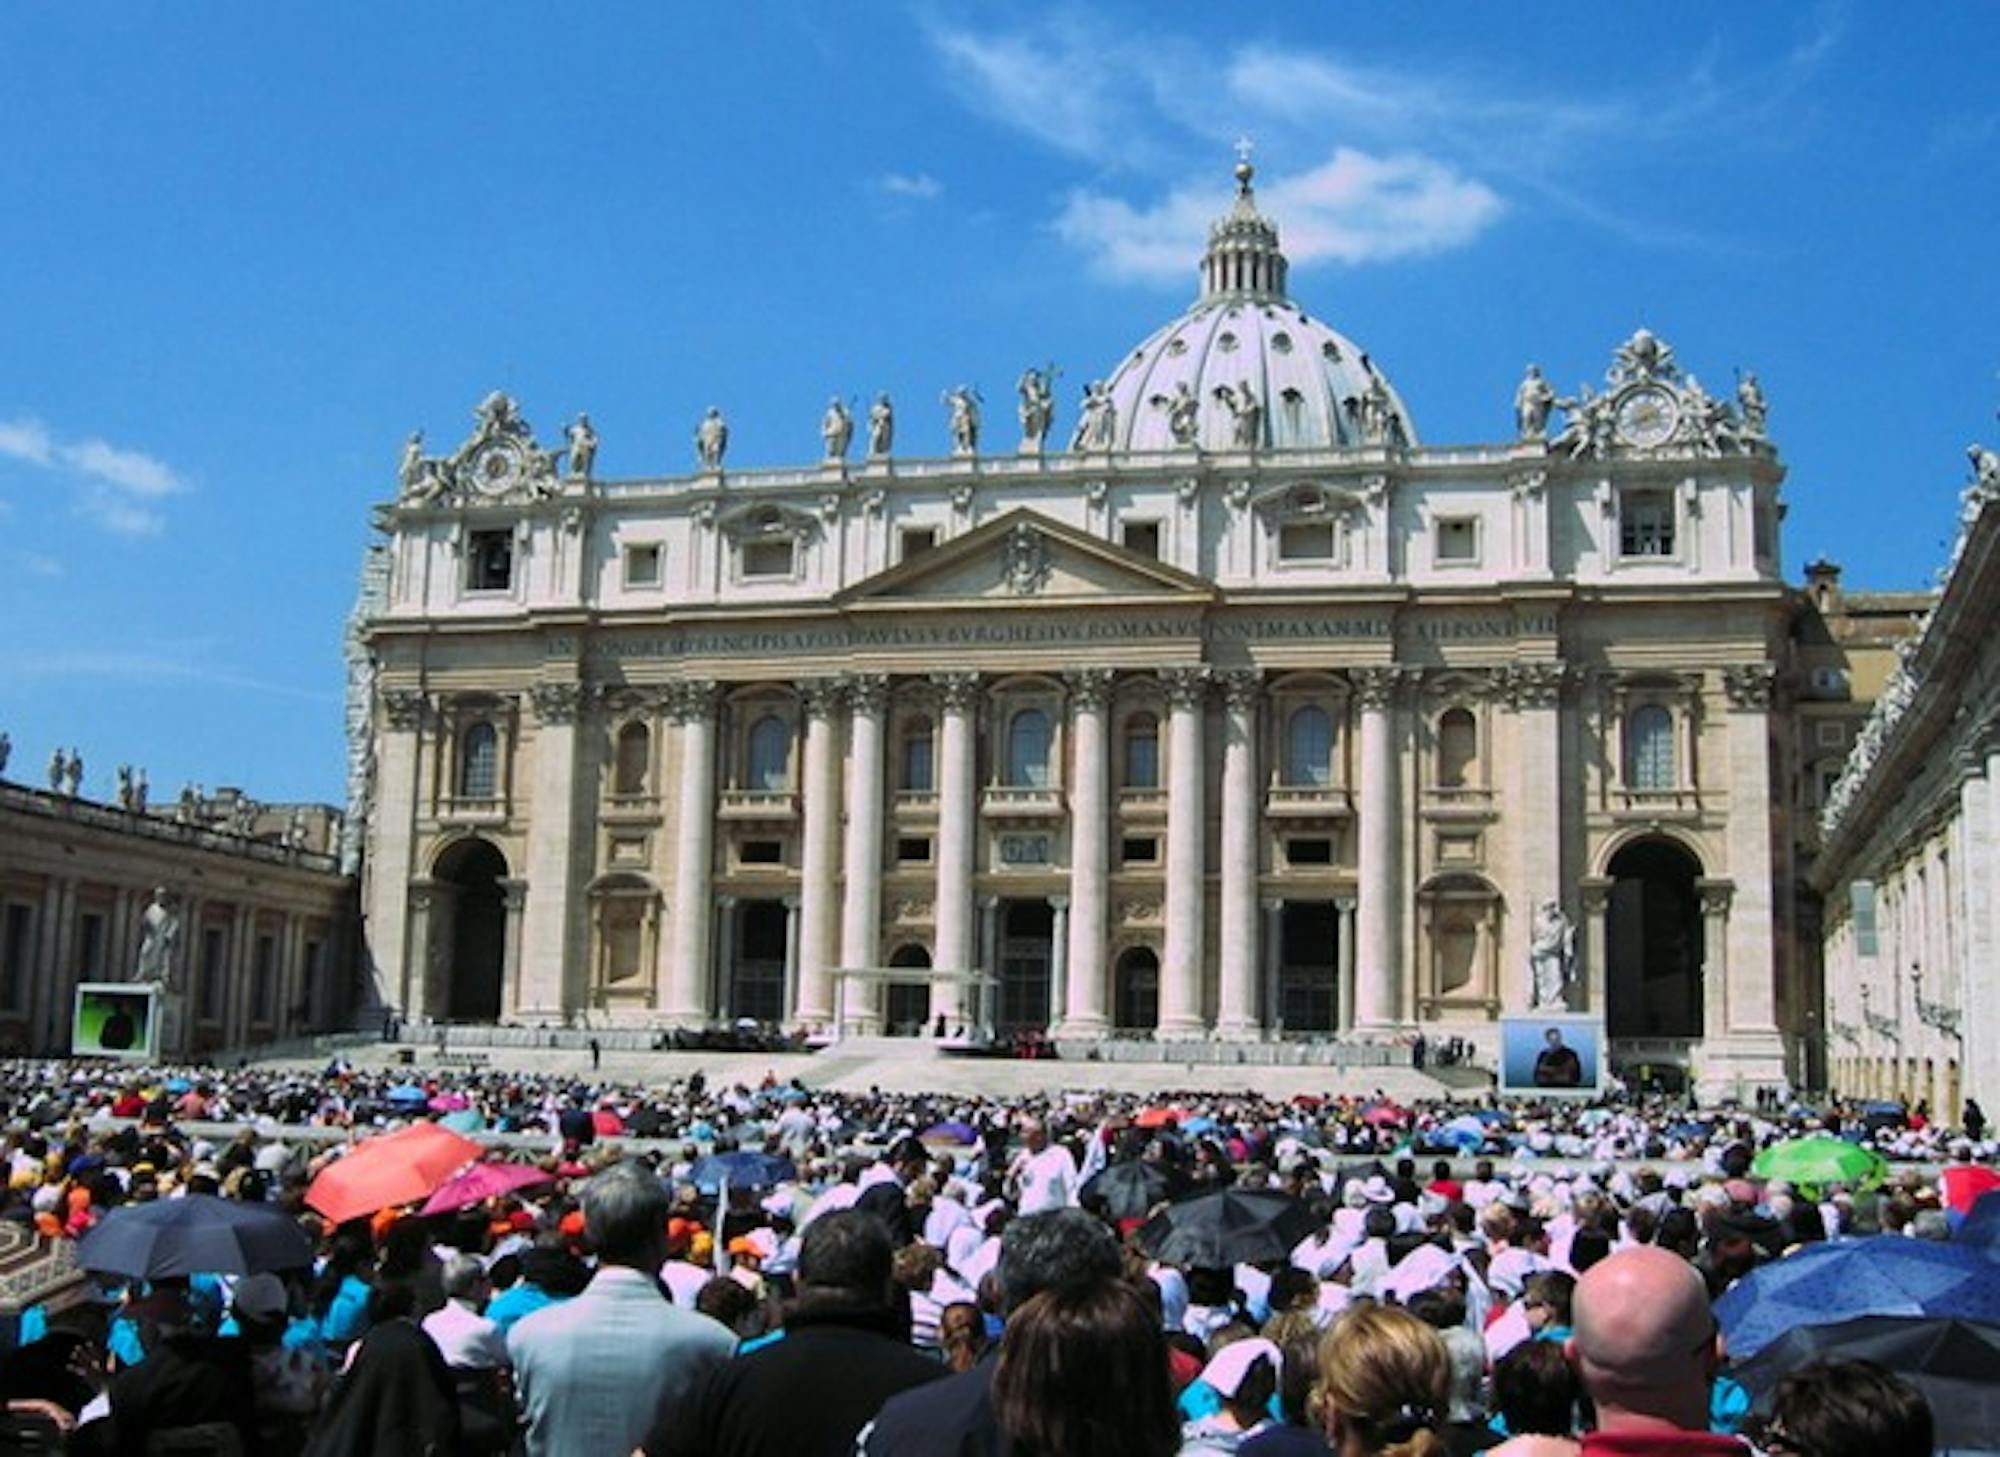 Crowds hoping to glimpse Benedict XVI outside St. Peter's disrupt class on the art history Foreign Study Program.